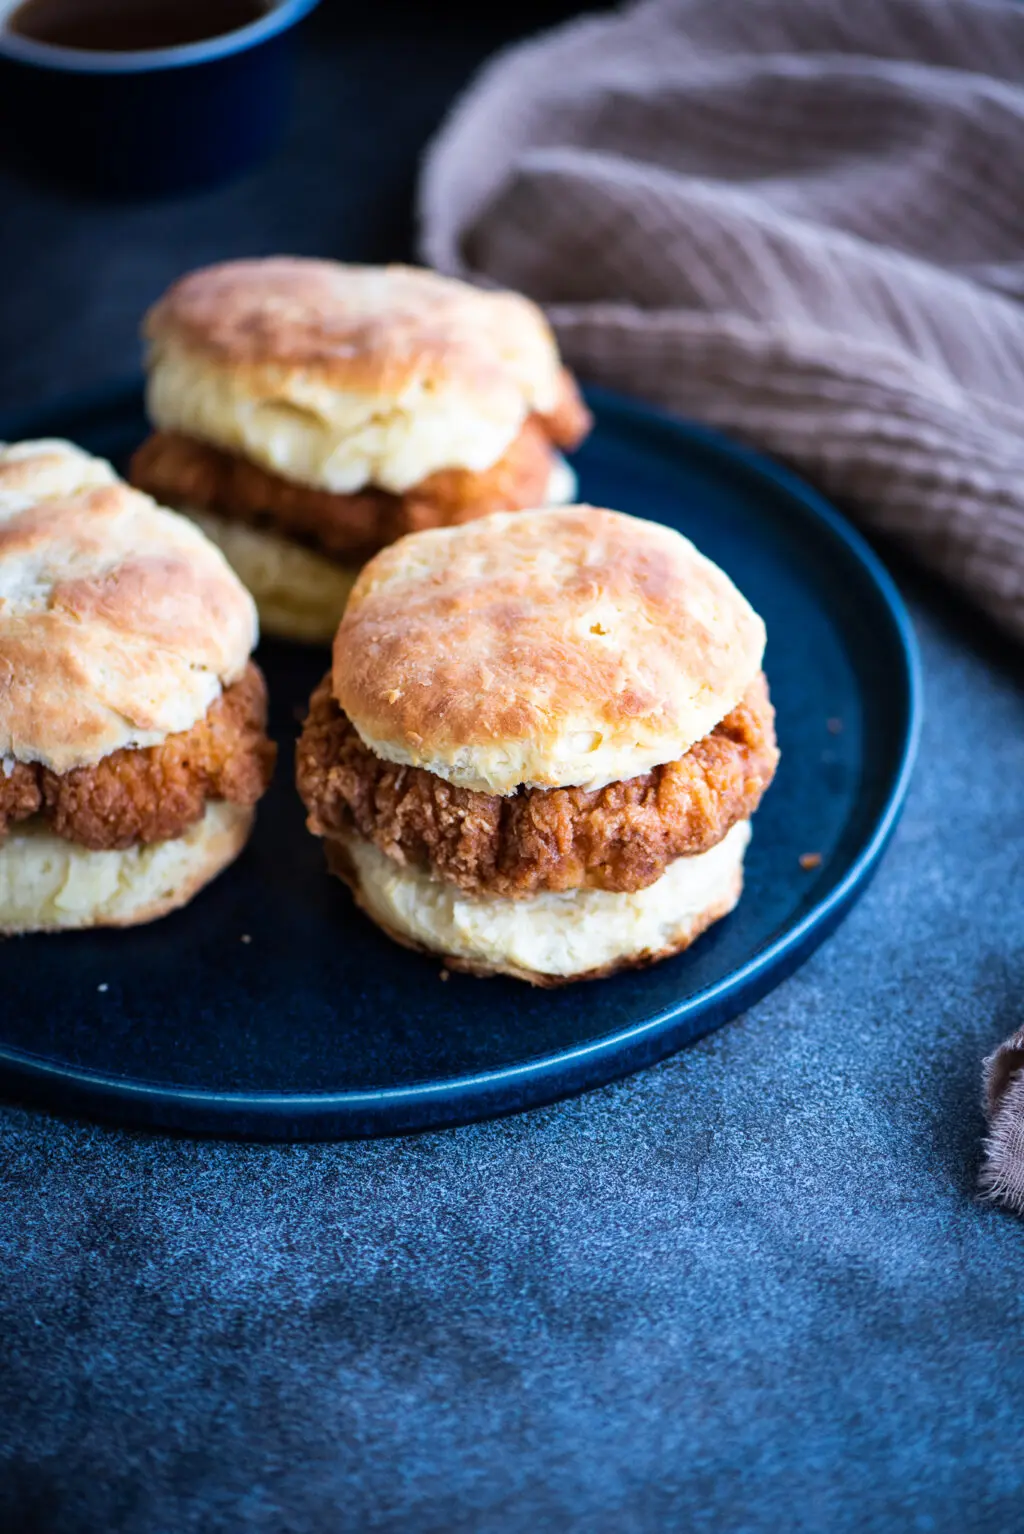 Chicken biscuits without the sauce